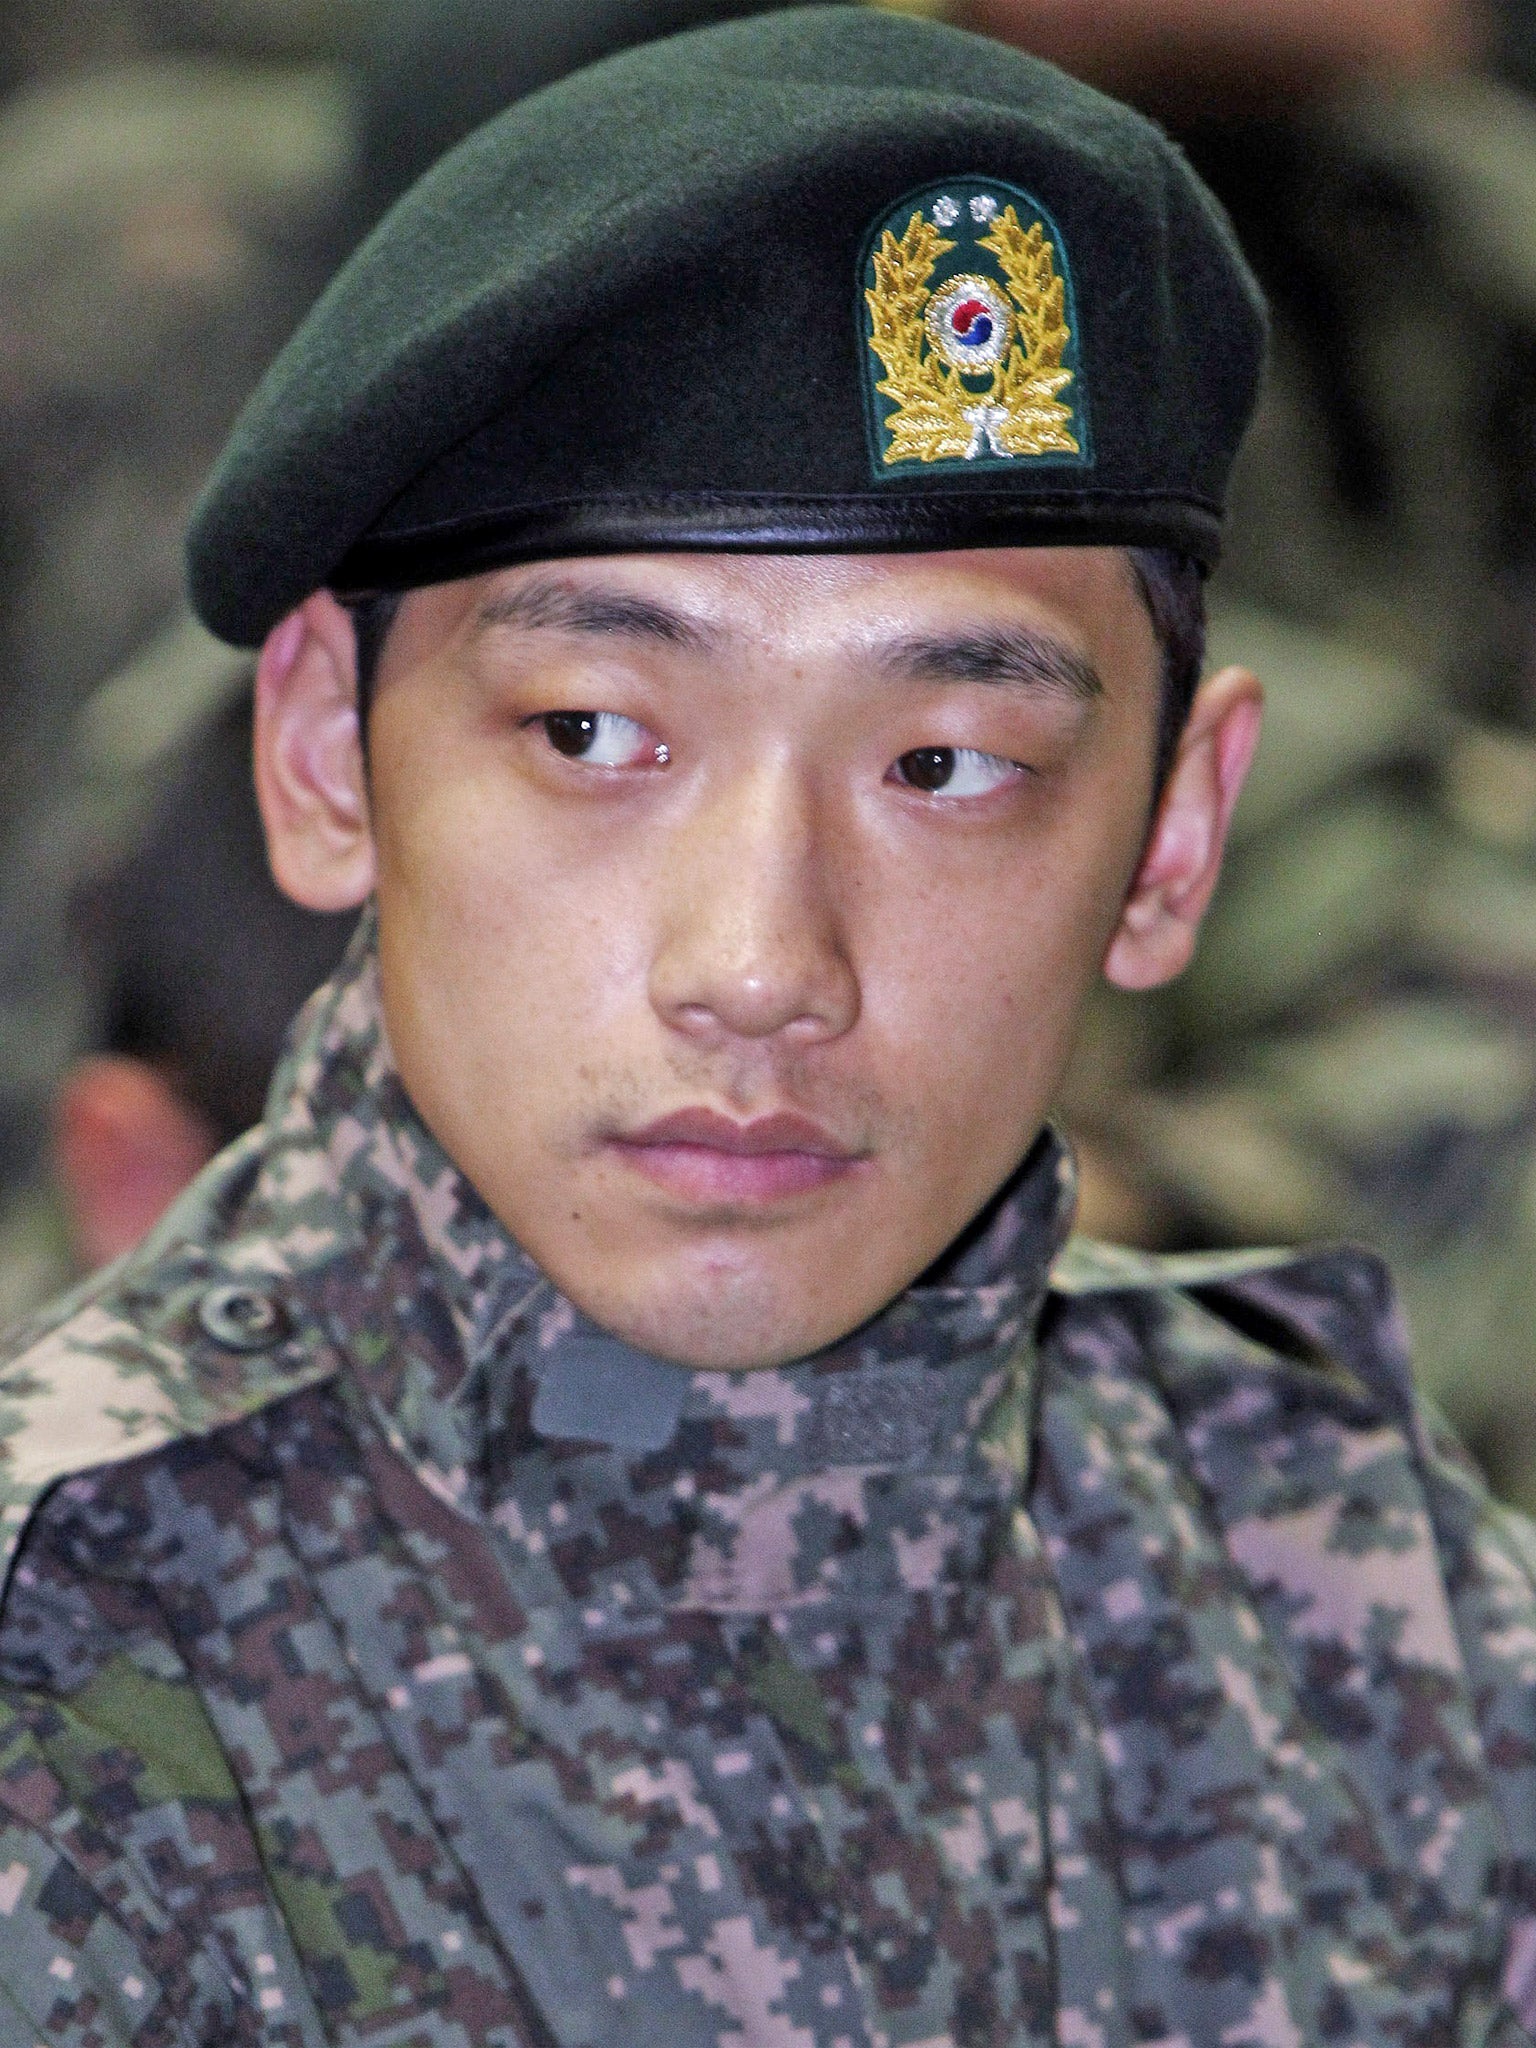 Rain is scheduled to be discharged from military duty in July